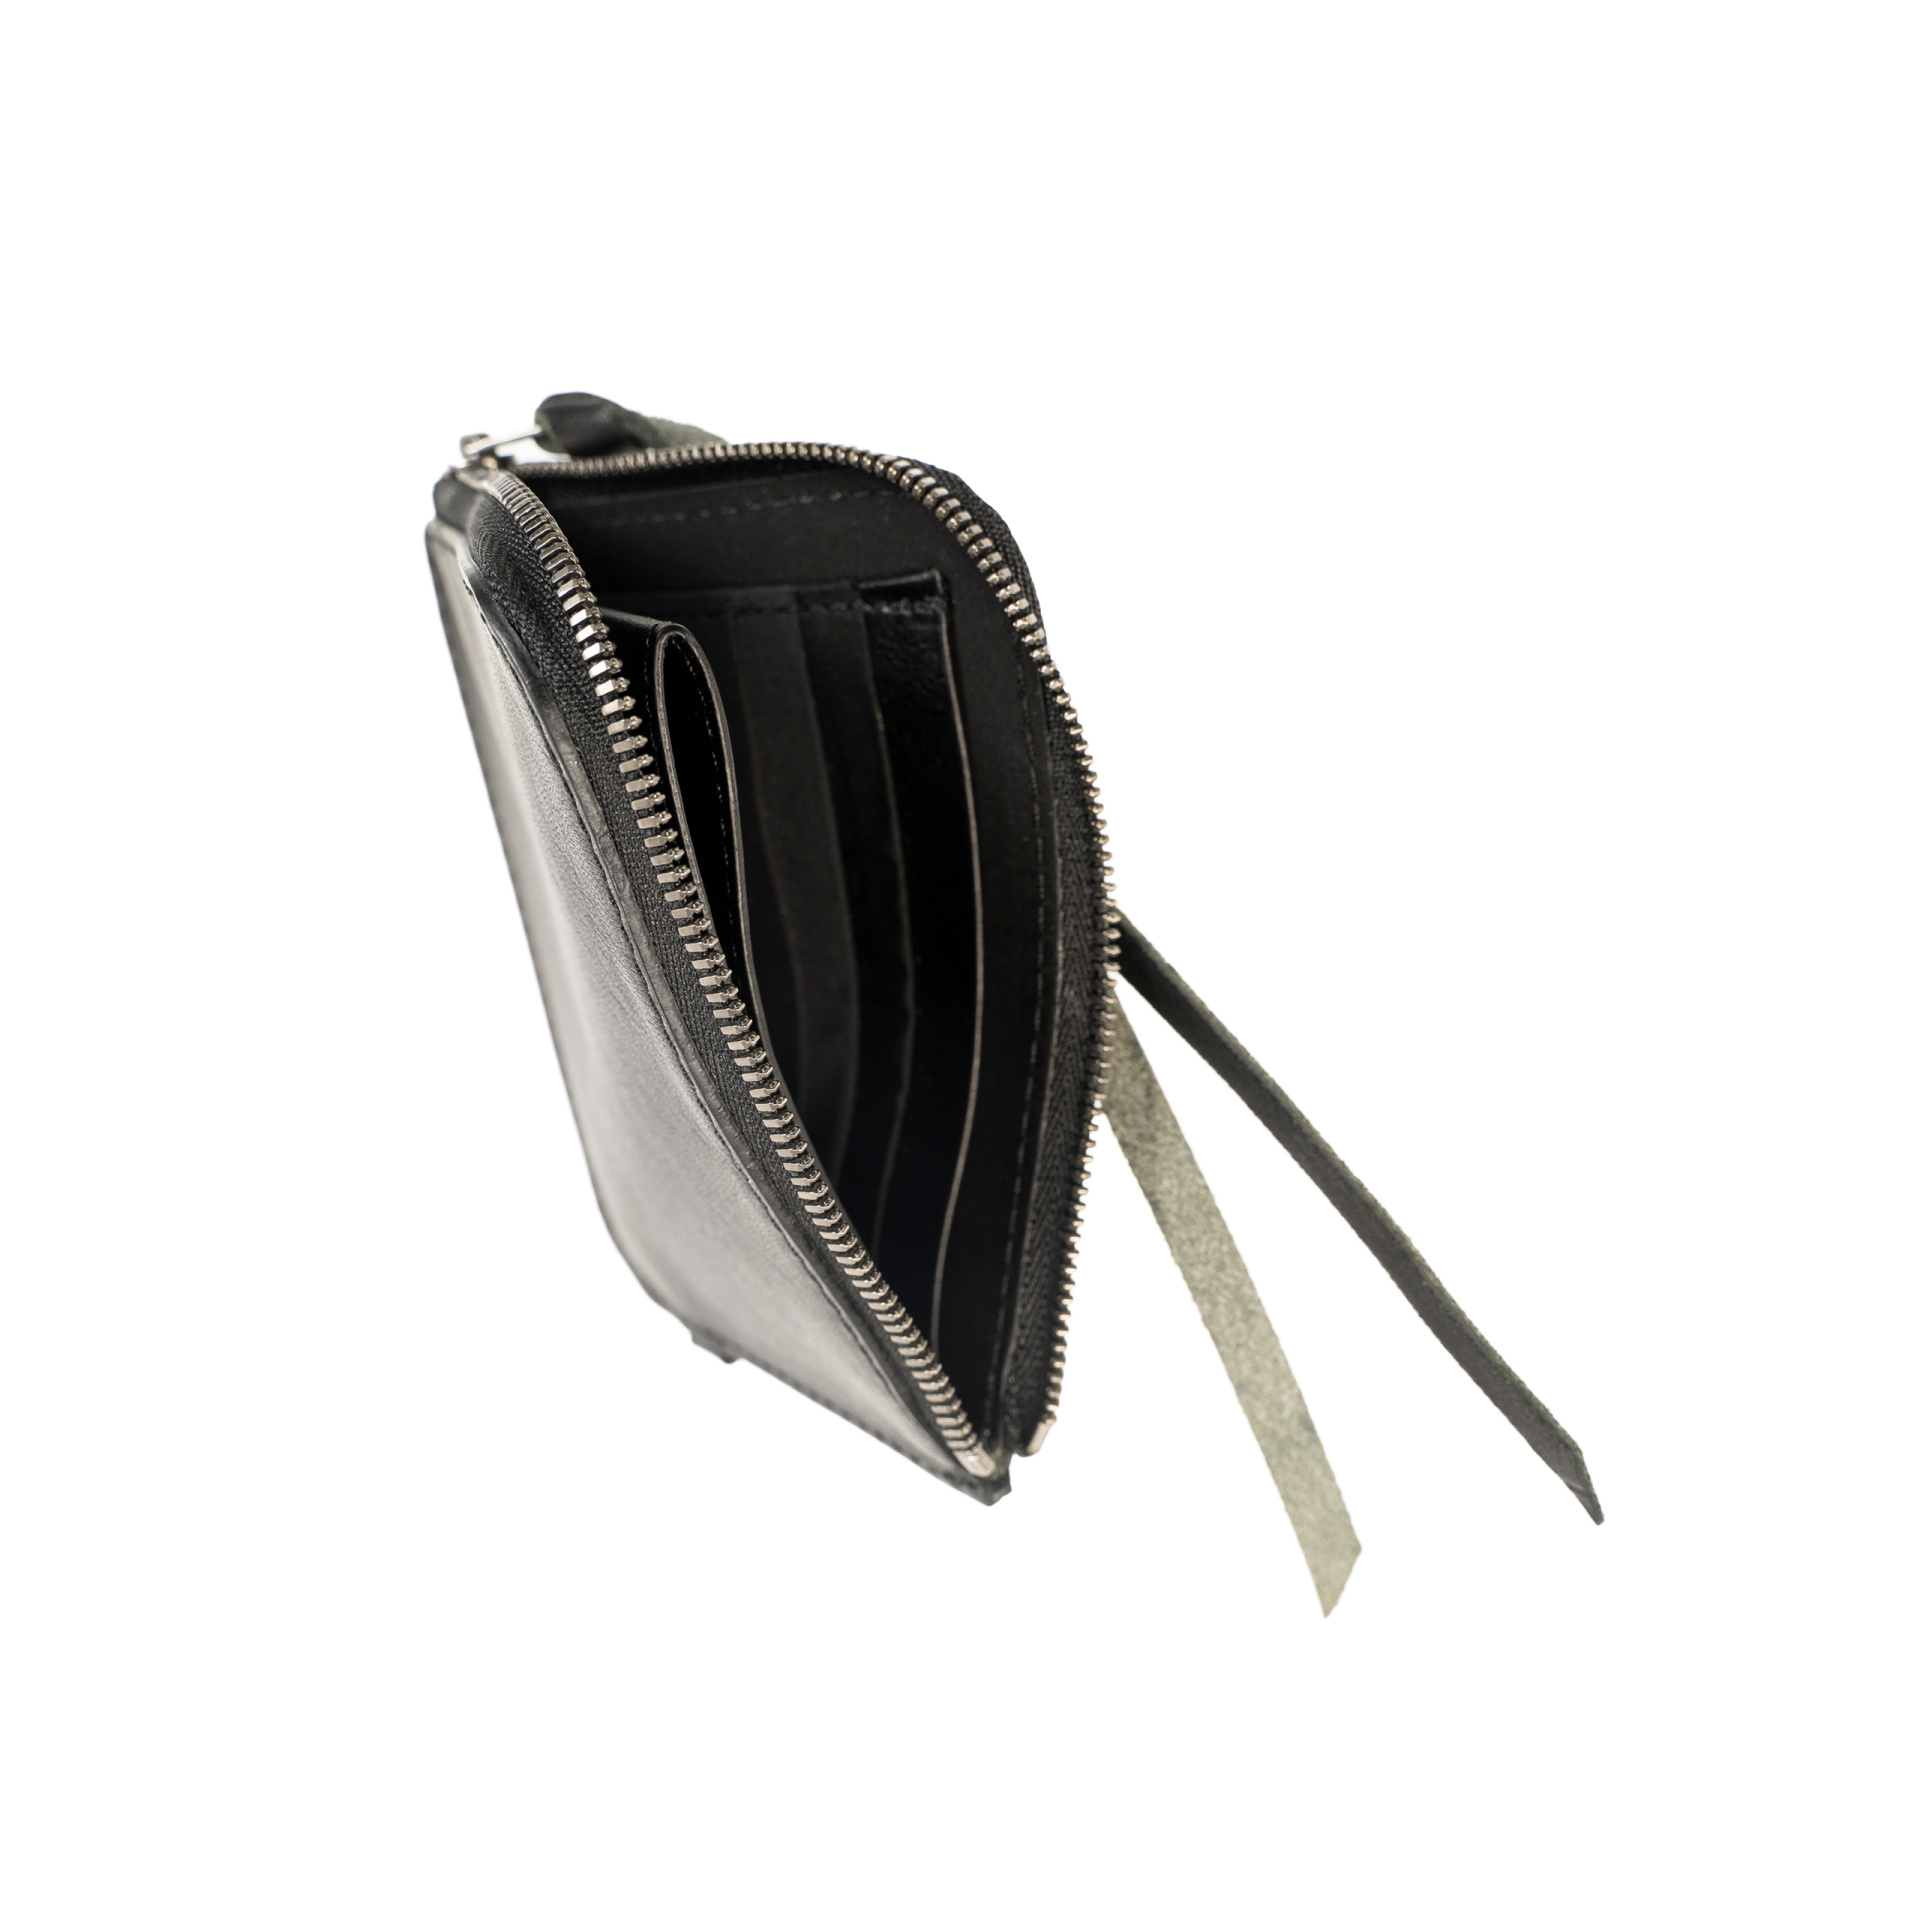 The Viridi-Anne Leather neck coin purse